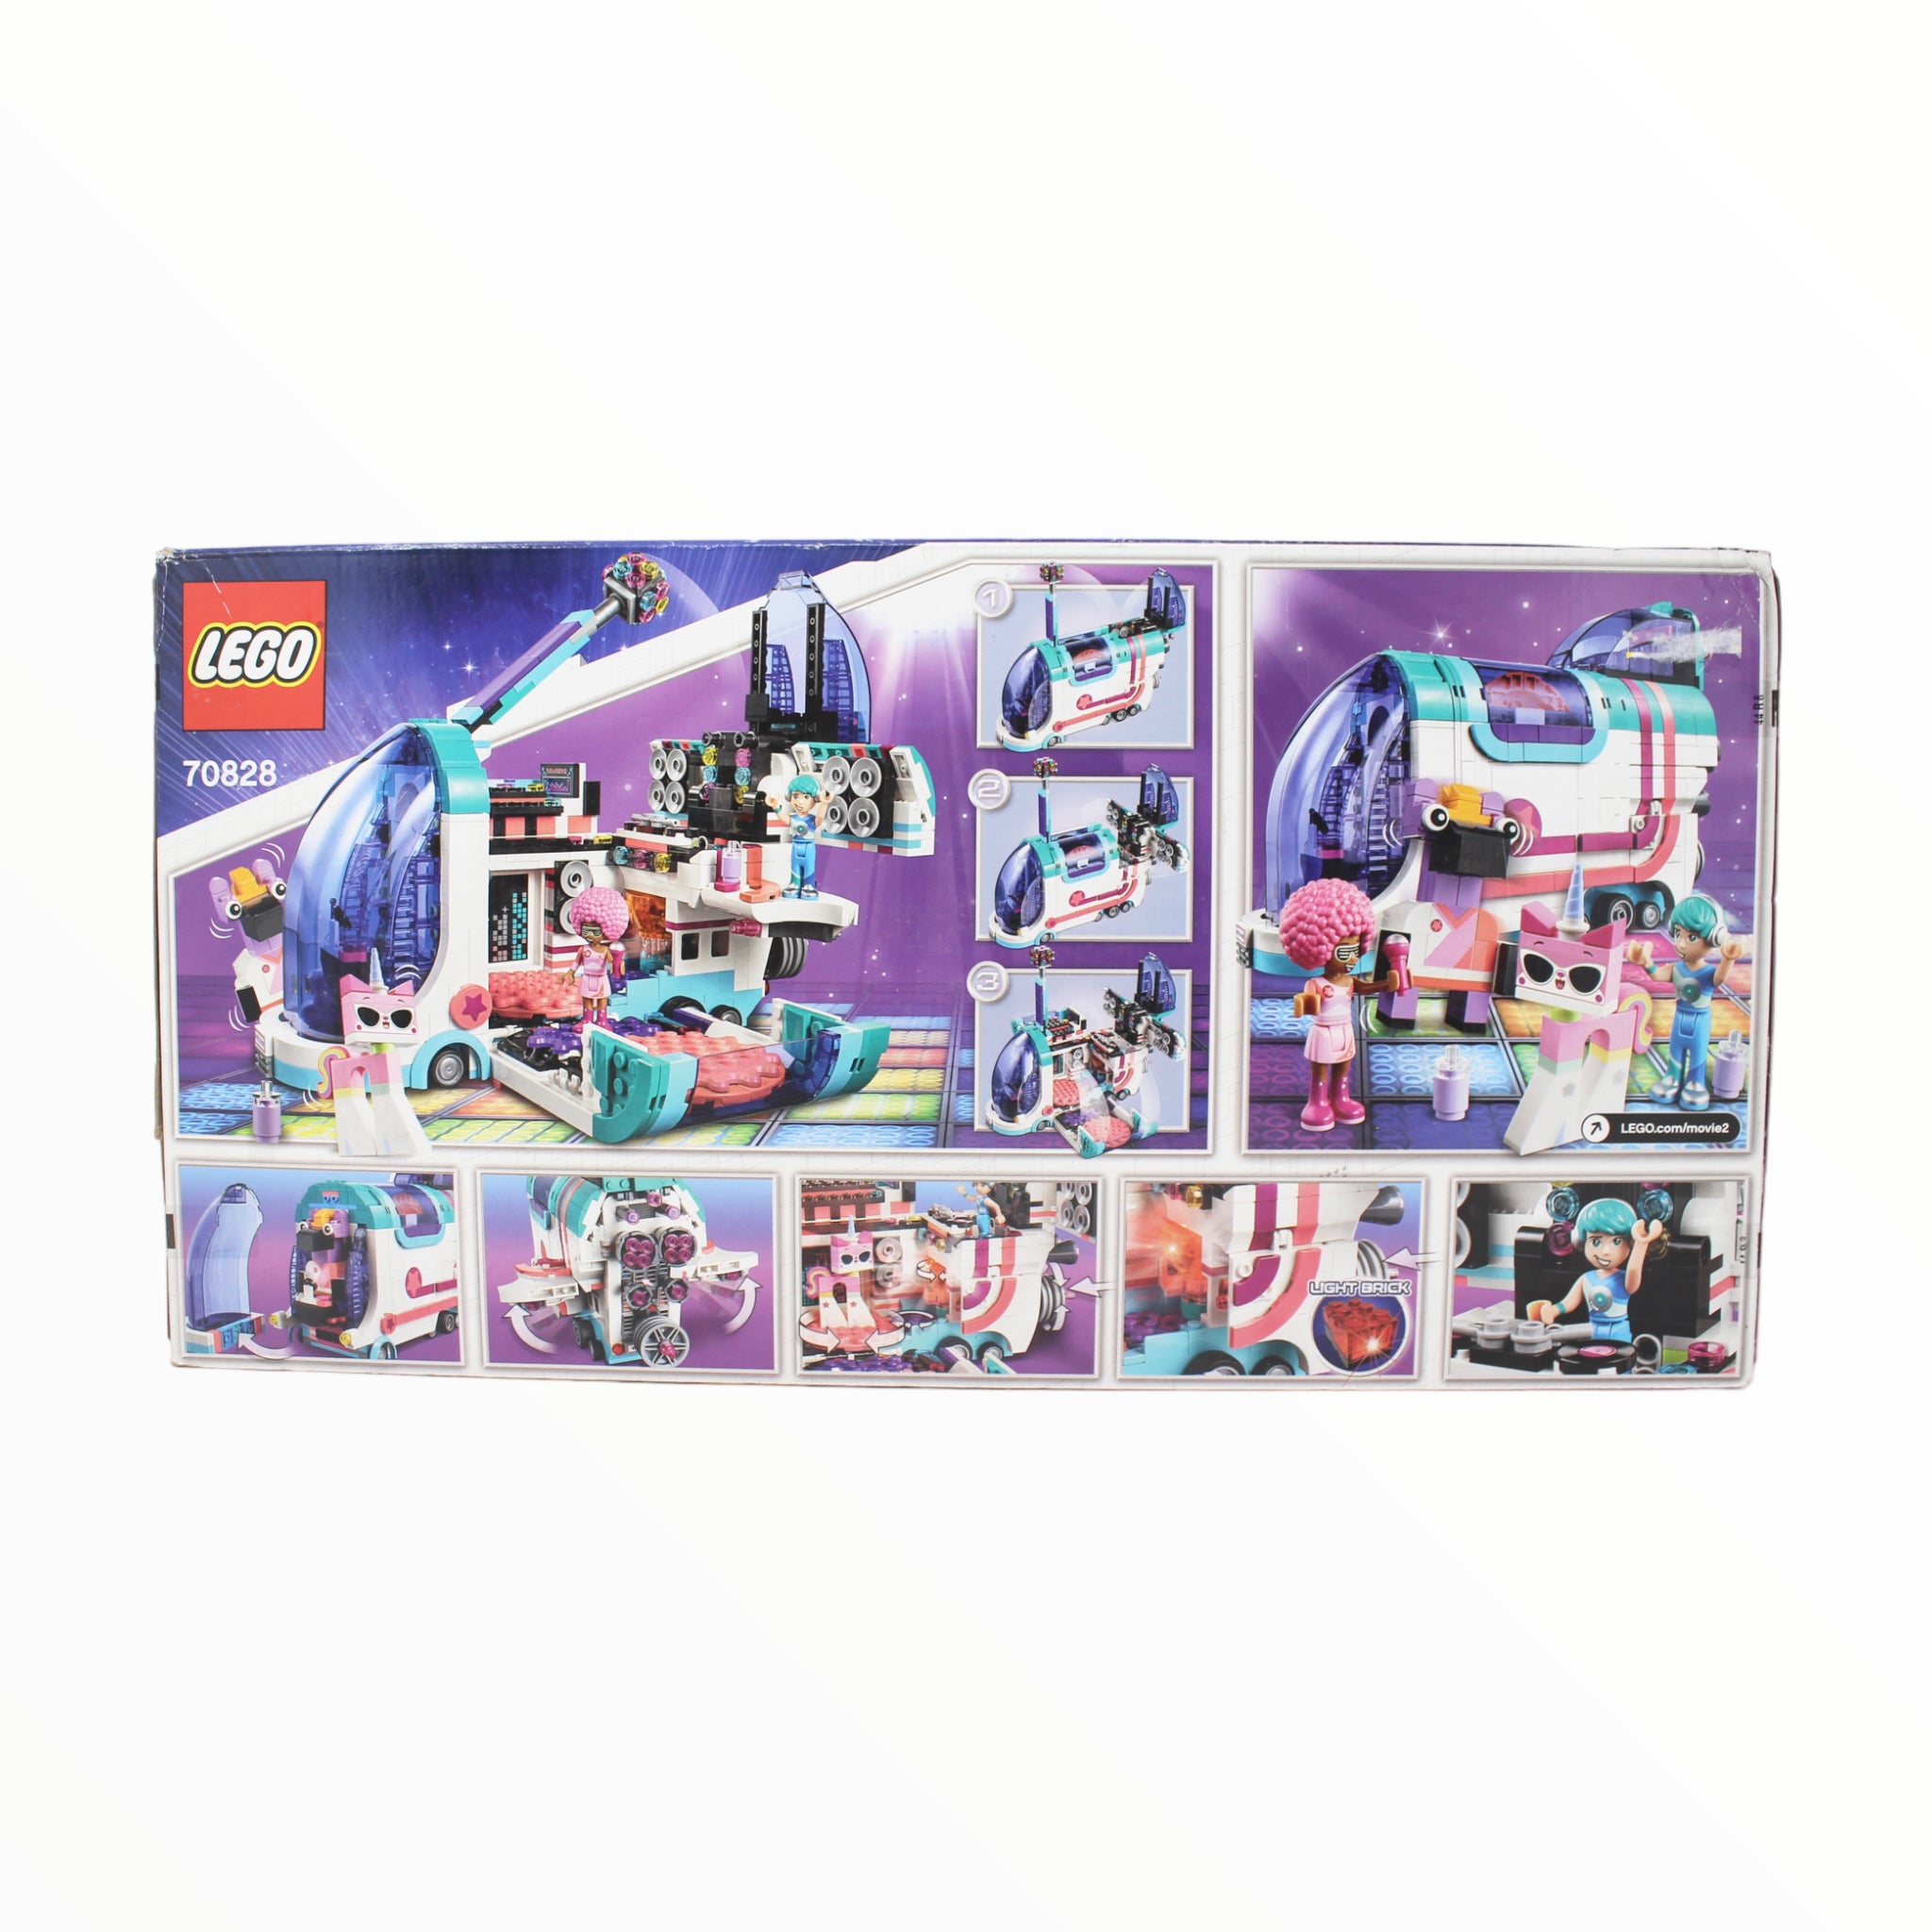 Retired Set 70828 The LEGO Movie 2 Pop-Up Party Bus